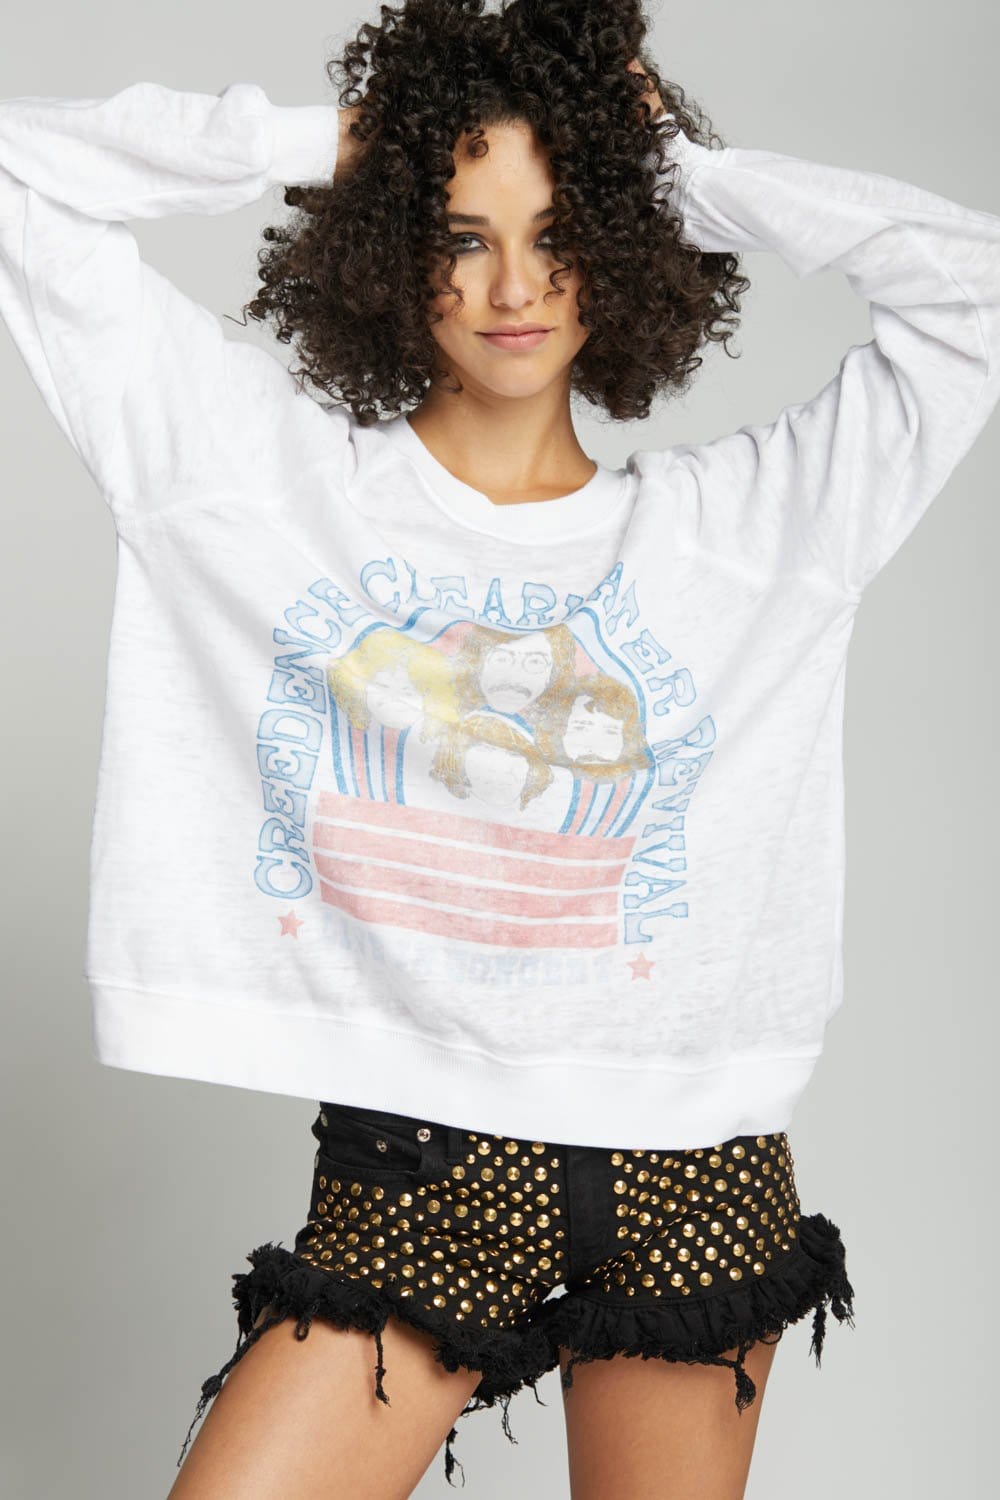 Recycled Karma Recycled Karma Creedence Clearwater Sweatshirt - Little Miss Muffin Children & Home